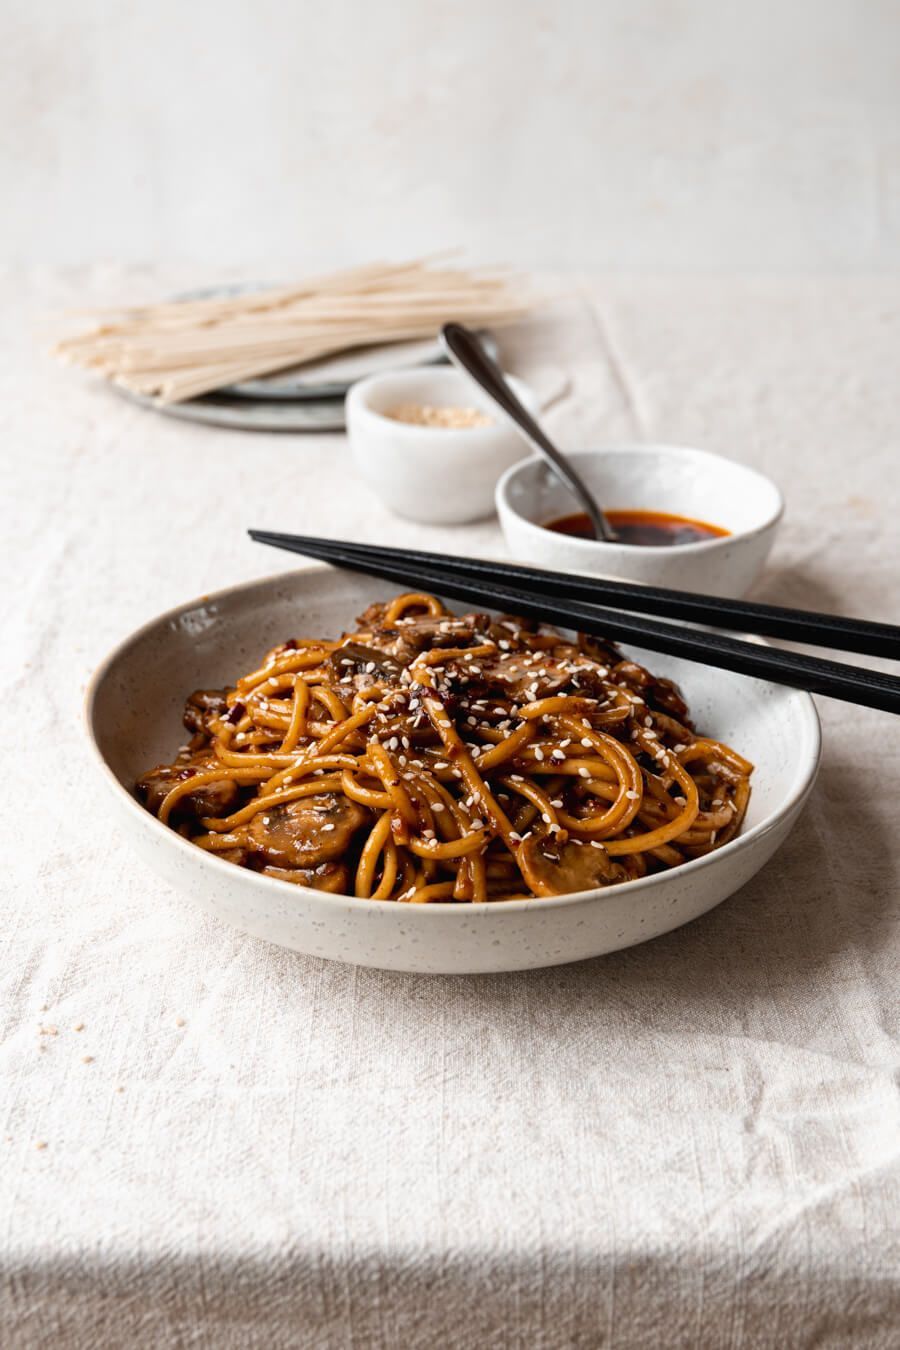 Vegan spicy udon noodles with mushrooms